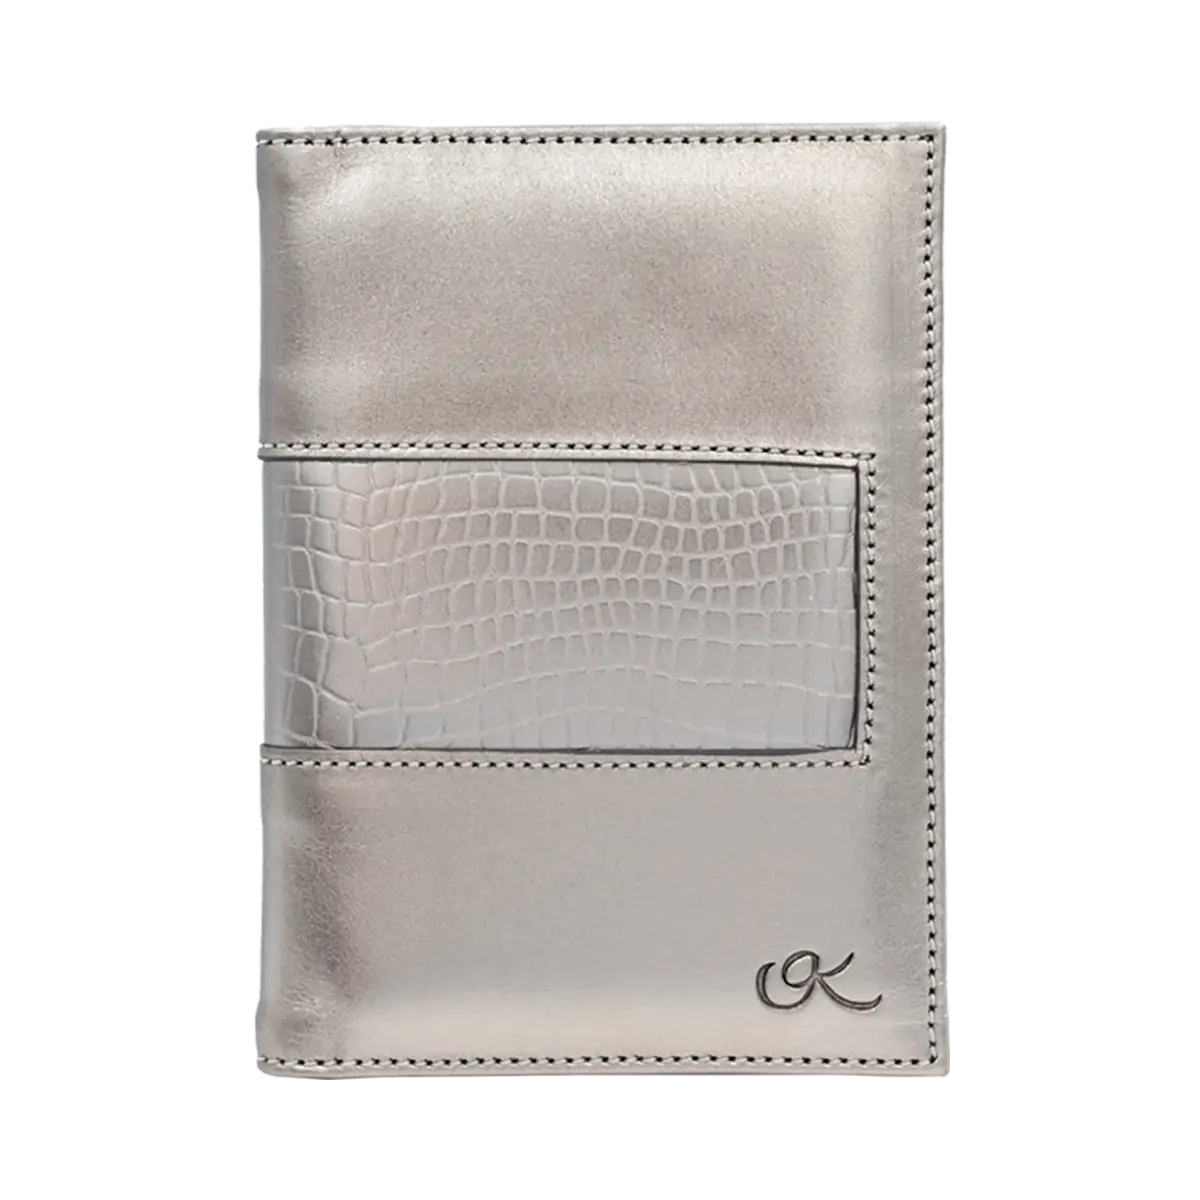 silver leather passport holder with detail print. Fashion travel accessory for women. Shop in San Diego, CA.